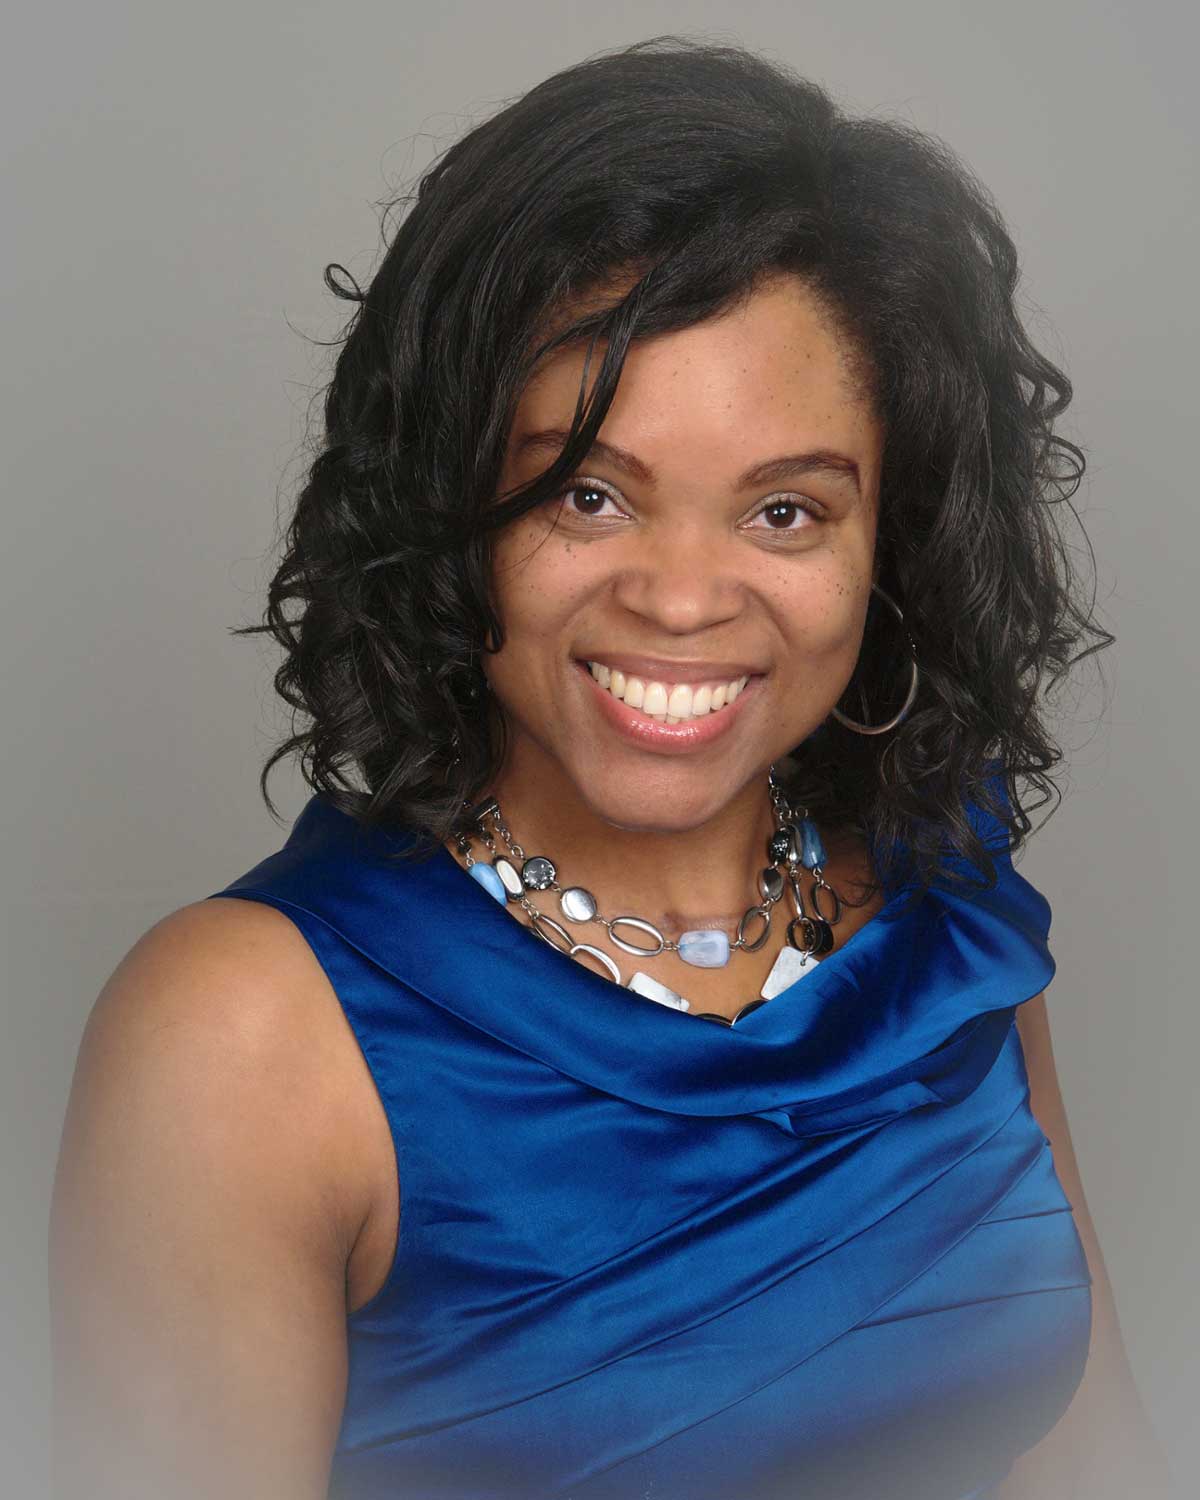 MGA Faculty Q&A With Dr. Simone Phipps: Why Women's Share Of Executive...